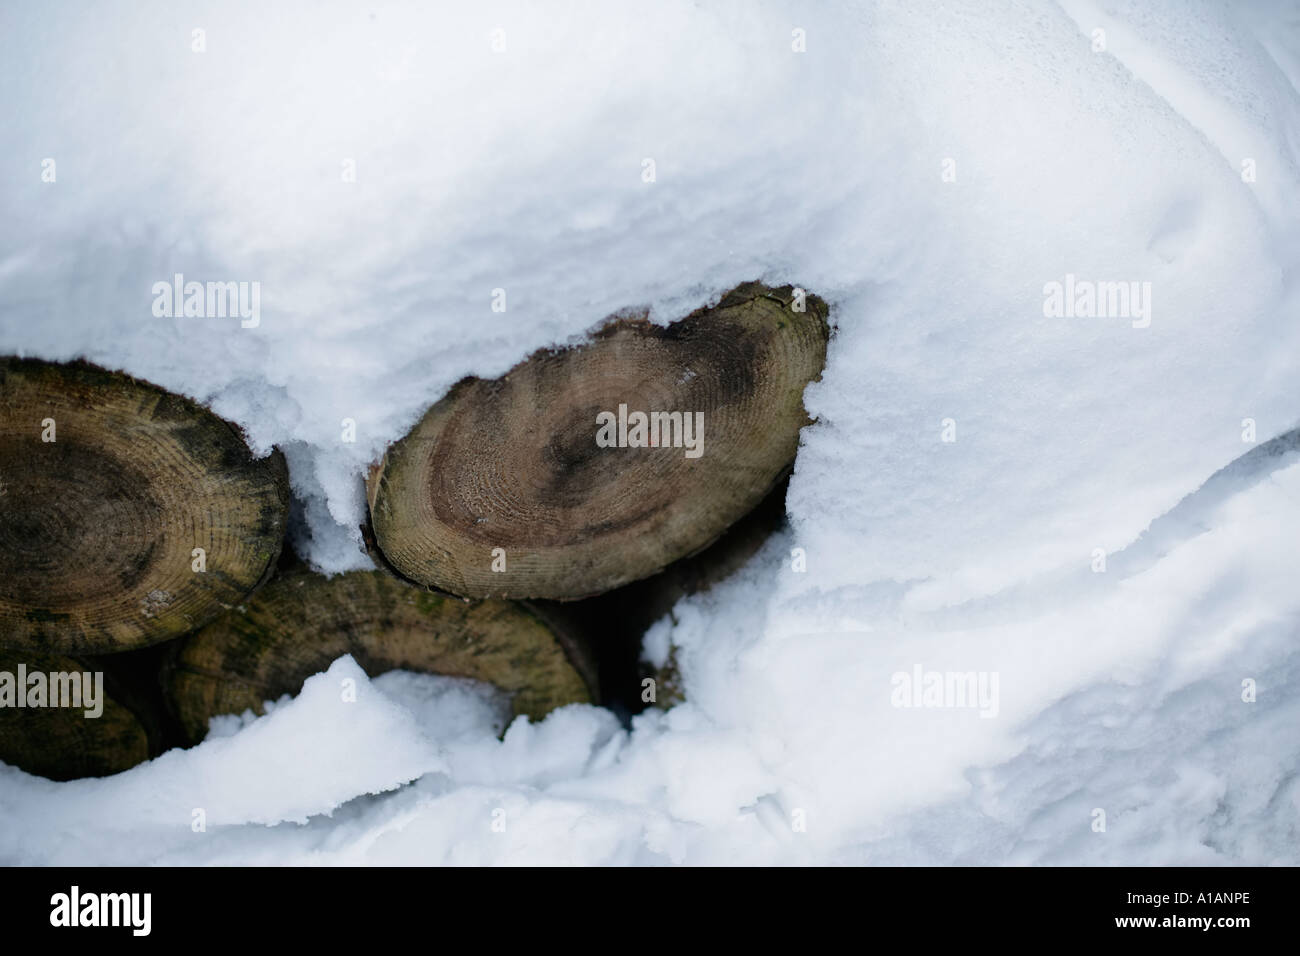 Snow-covered logs Stock Photo